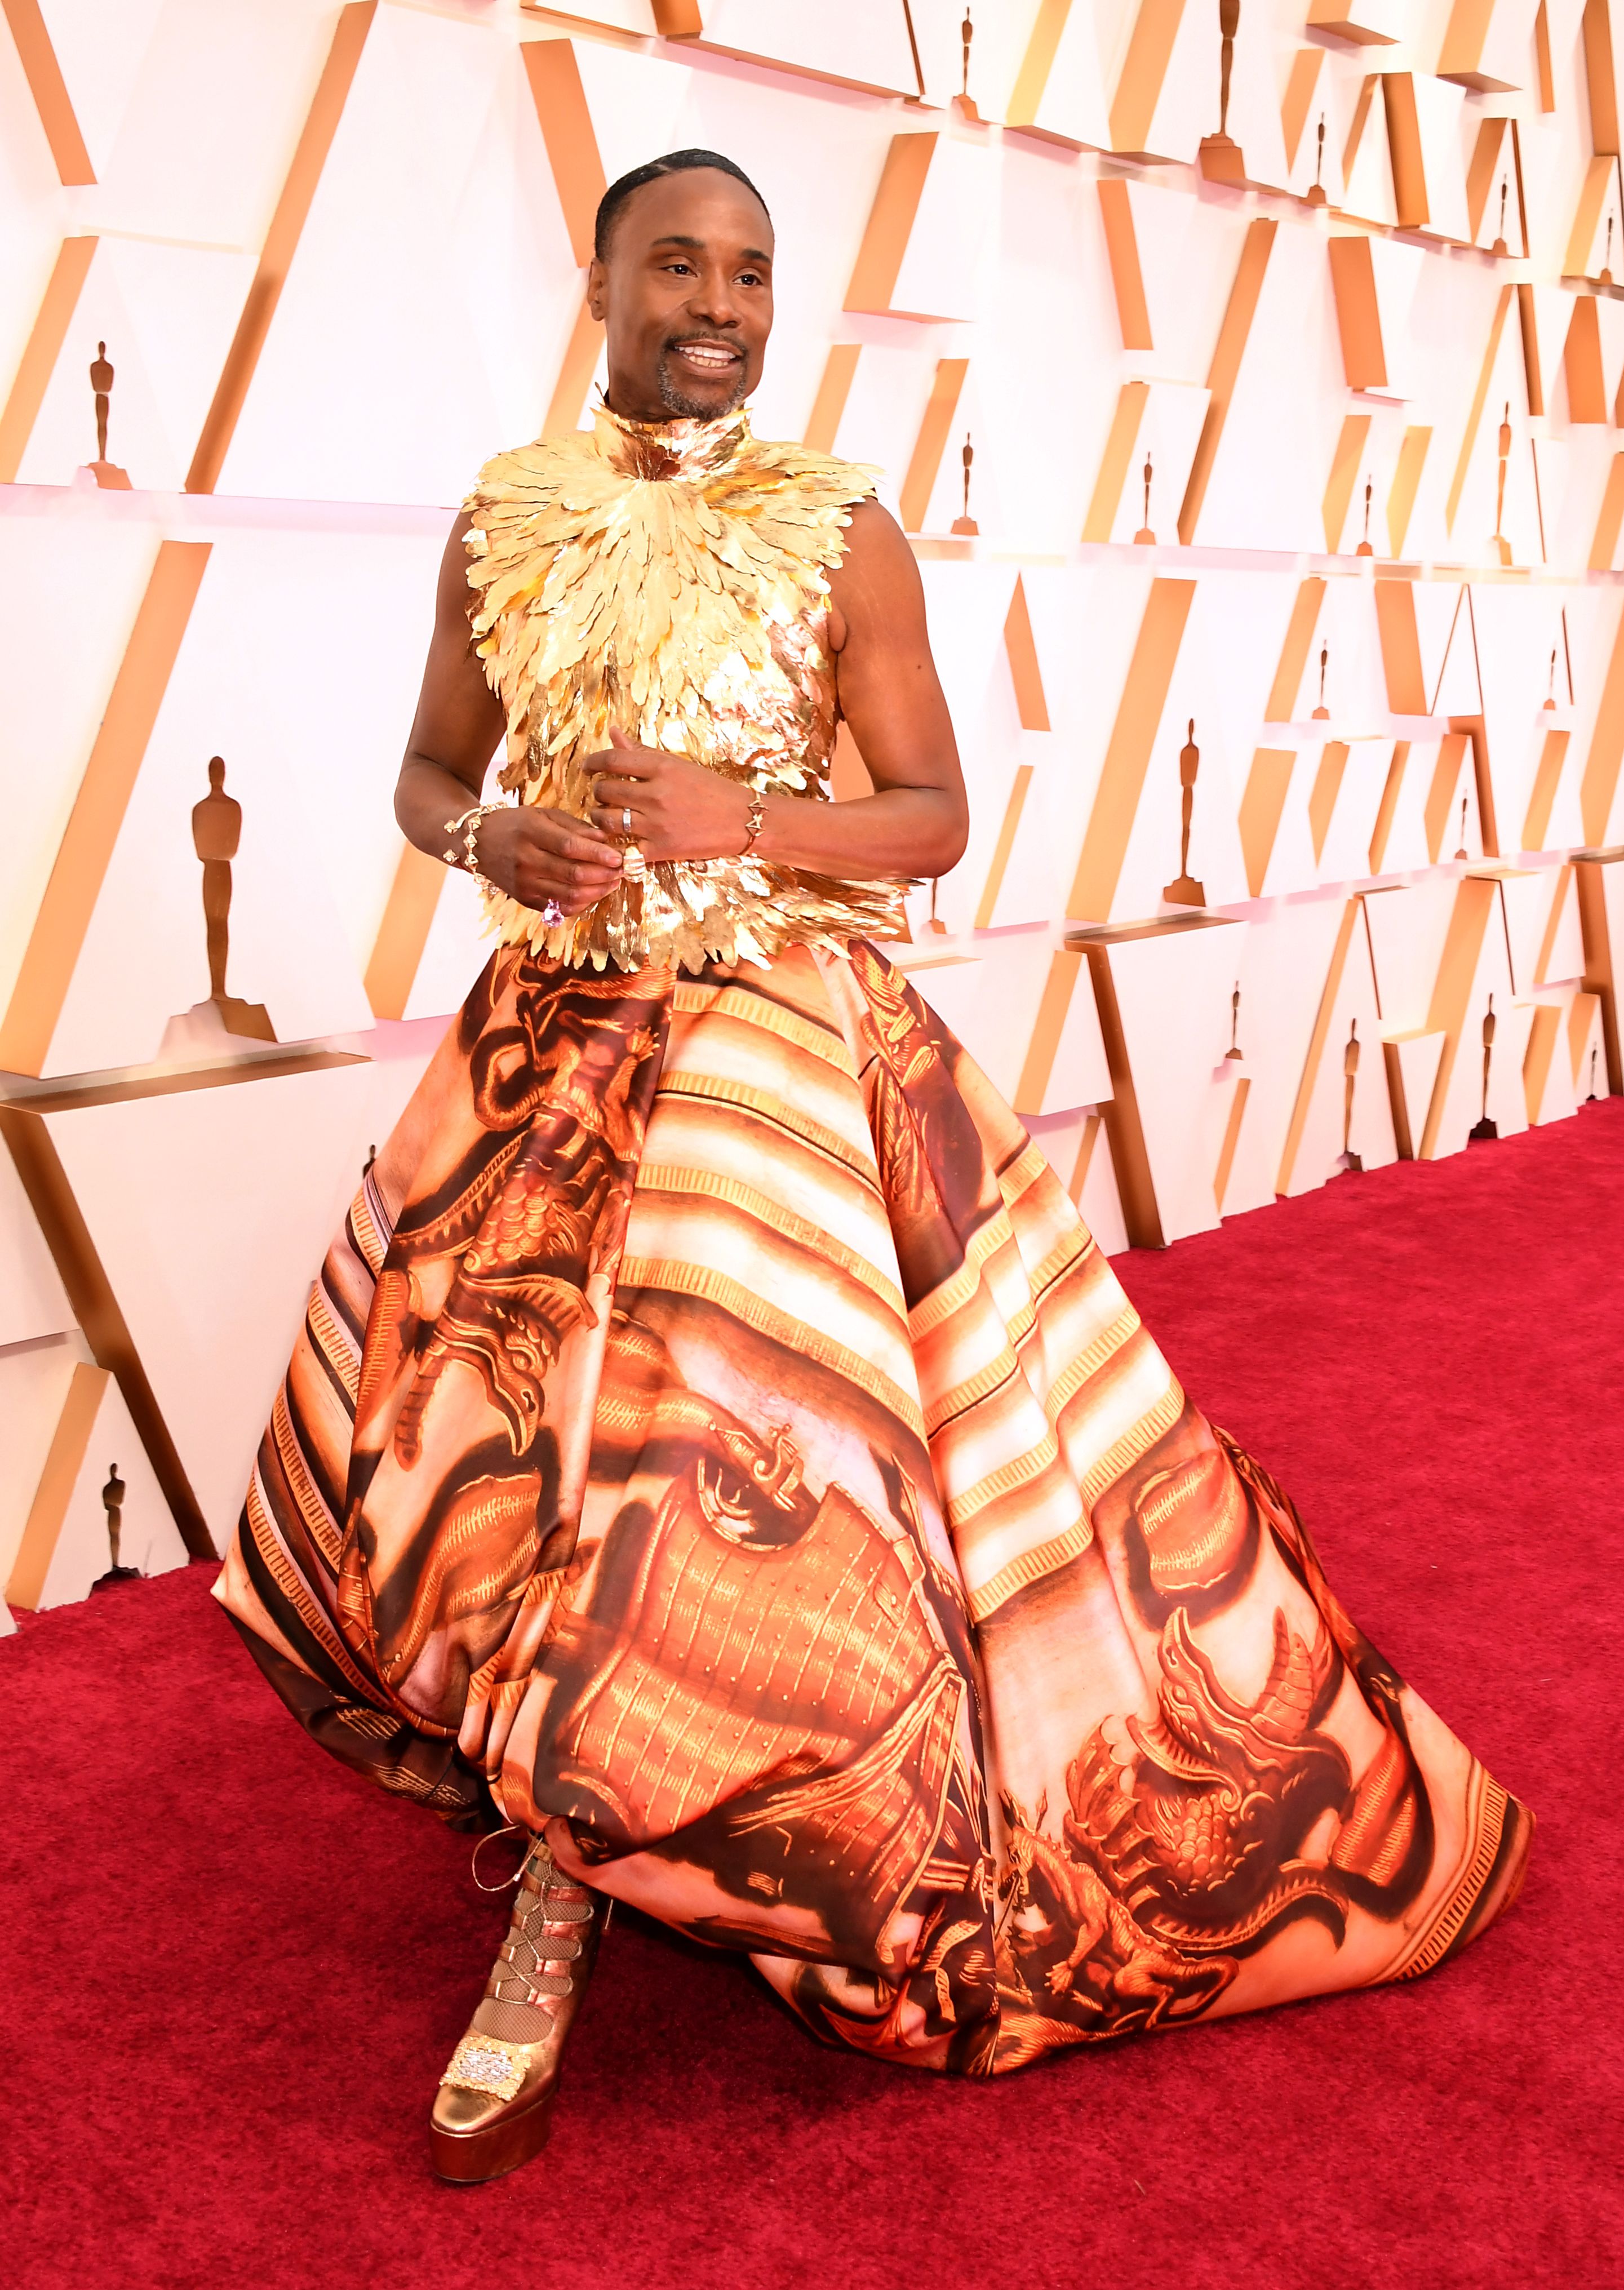 Billy Porter at the Academy Awards on February 09, 2020 in Hollywood, California. | Photo: Getty Images